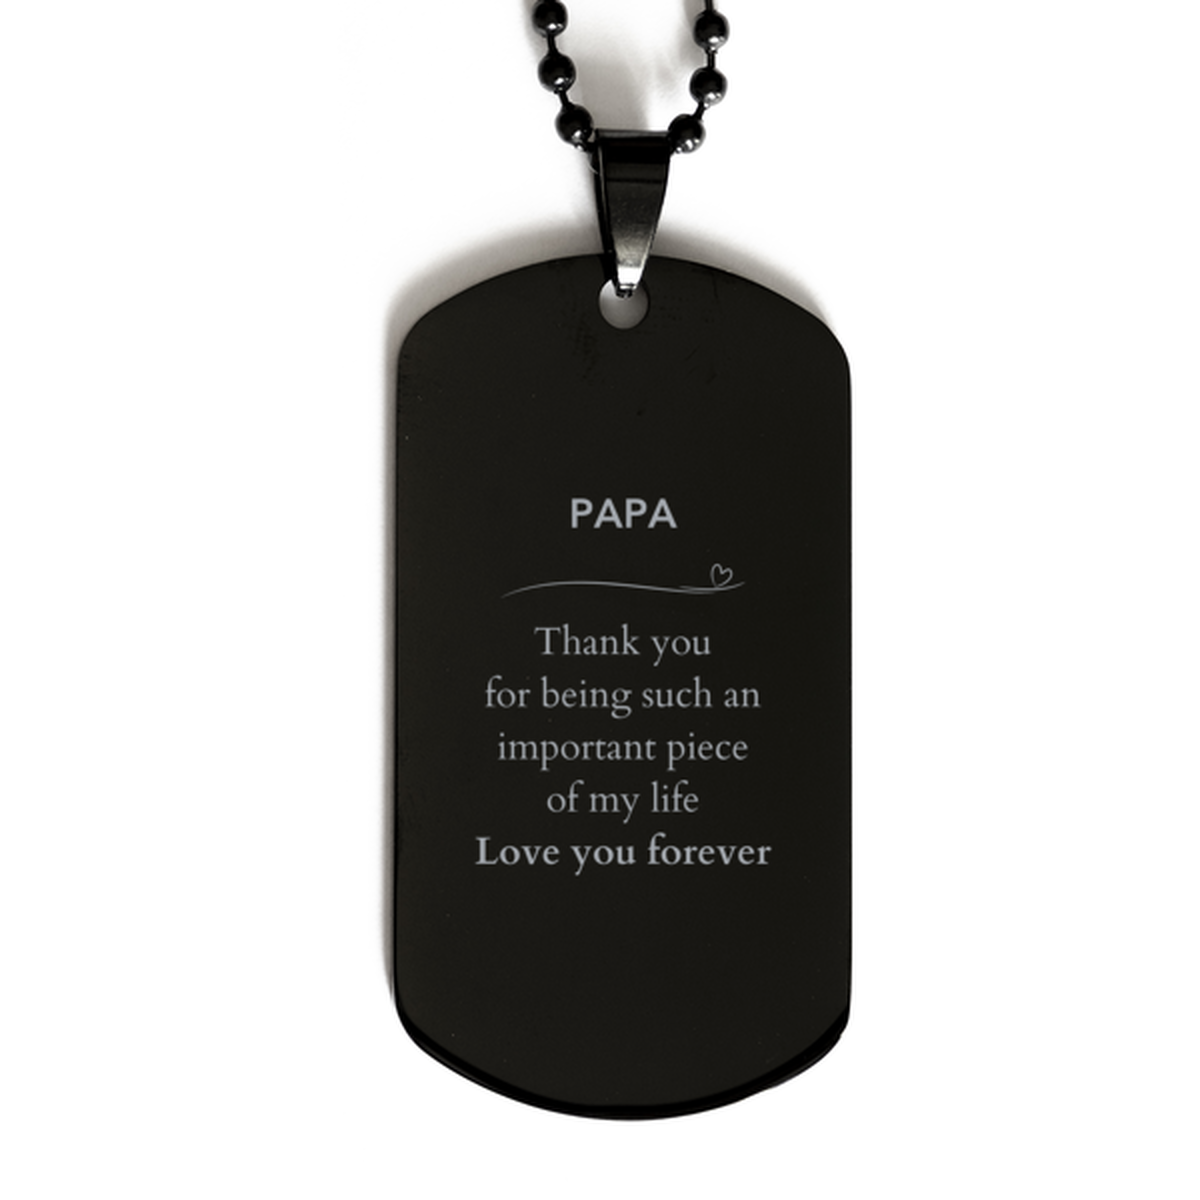 Appropriate Papa Black Dog Tag Epic Birthday Gifts for Papa Thank you for being such an important piece of my life Papa Christmas Mothers Fathers Day